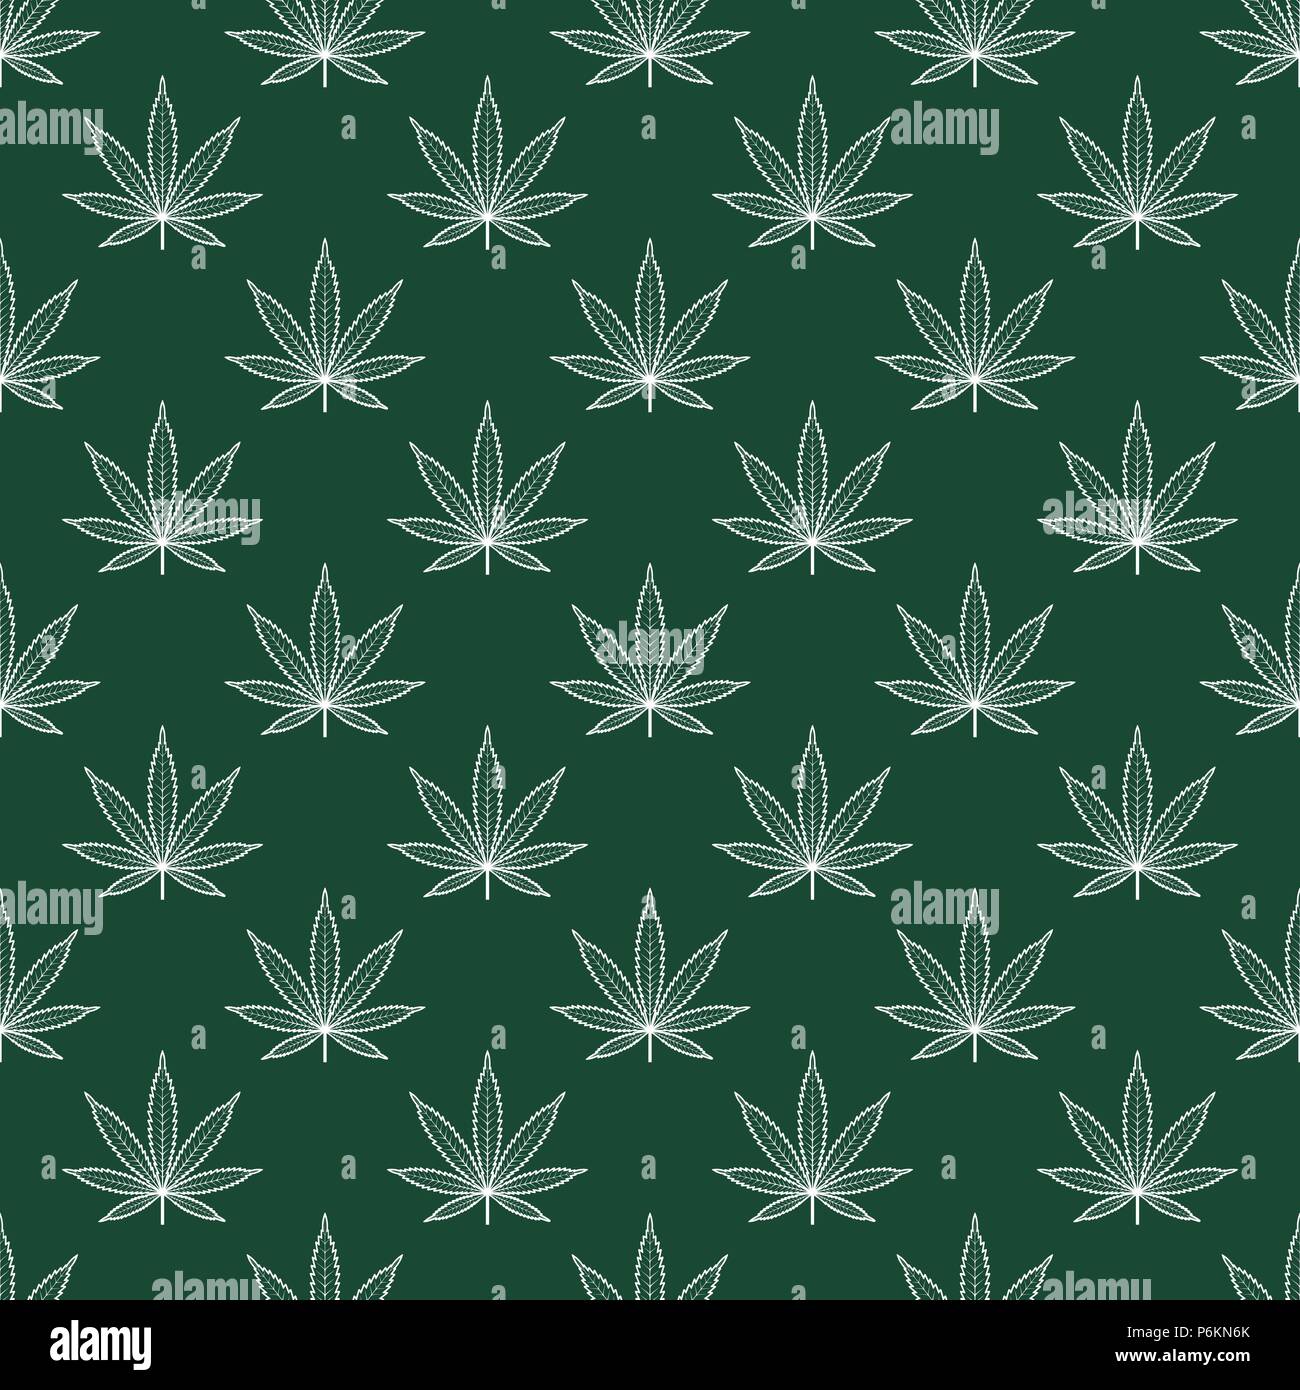 Seamless pattern with marijuana leaf. Cannabis background. Pattern can be used for fabric design, wallpaper, wrapping papers. Isolated vector illustra Stock Vector